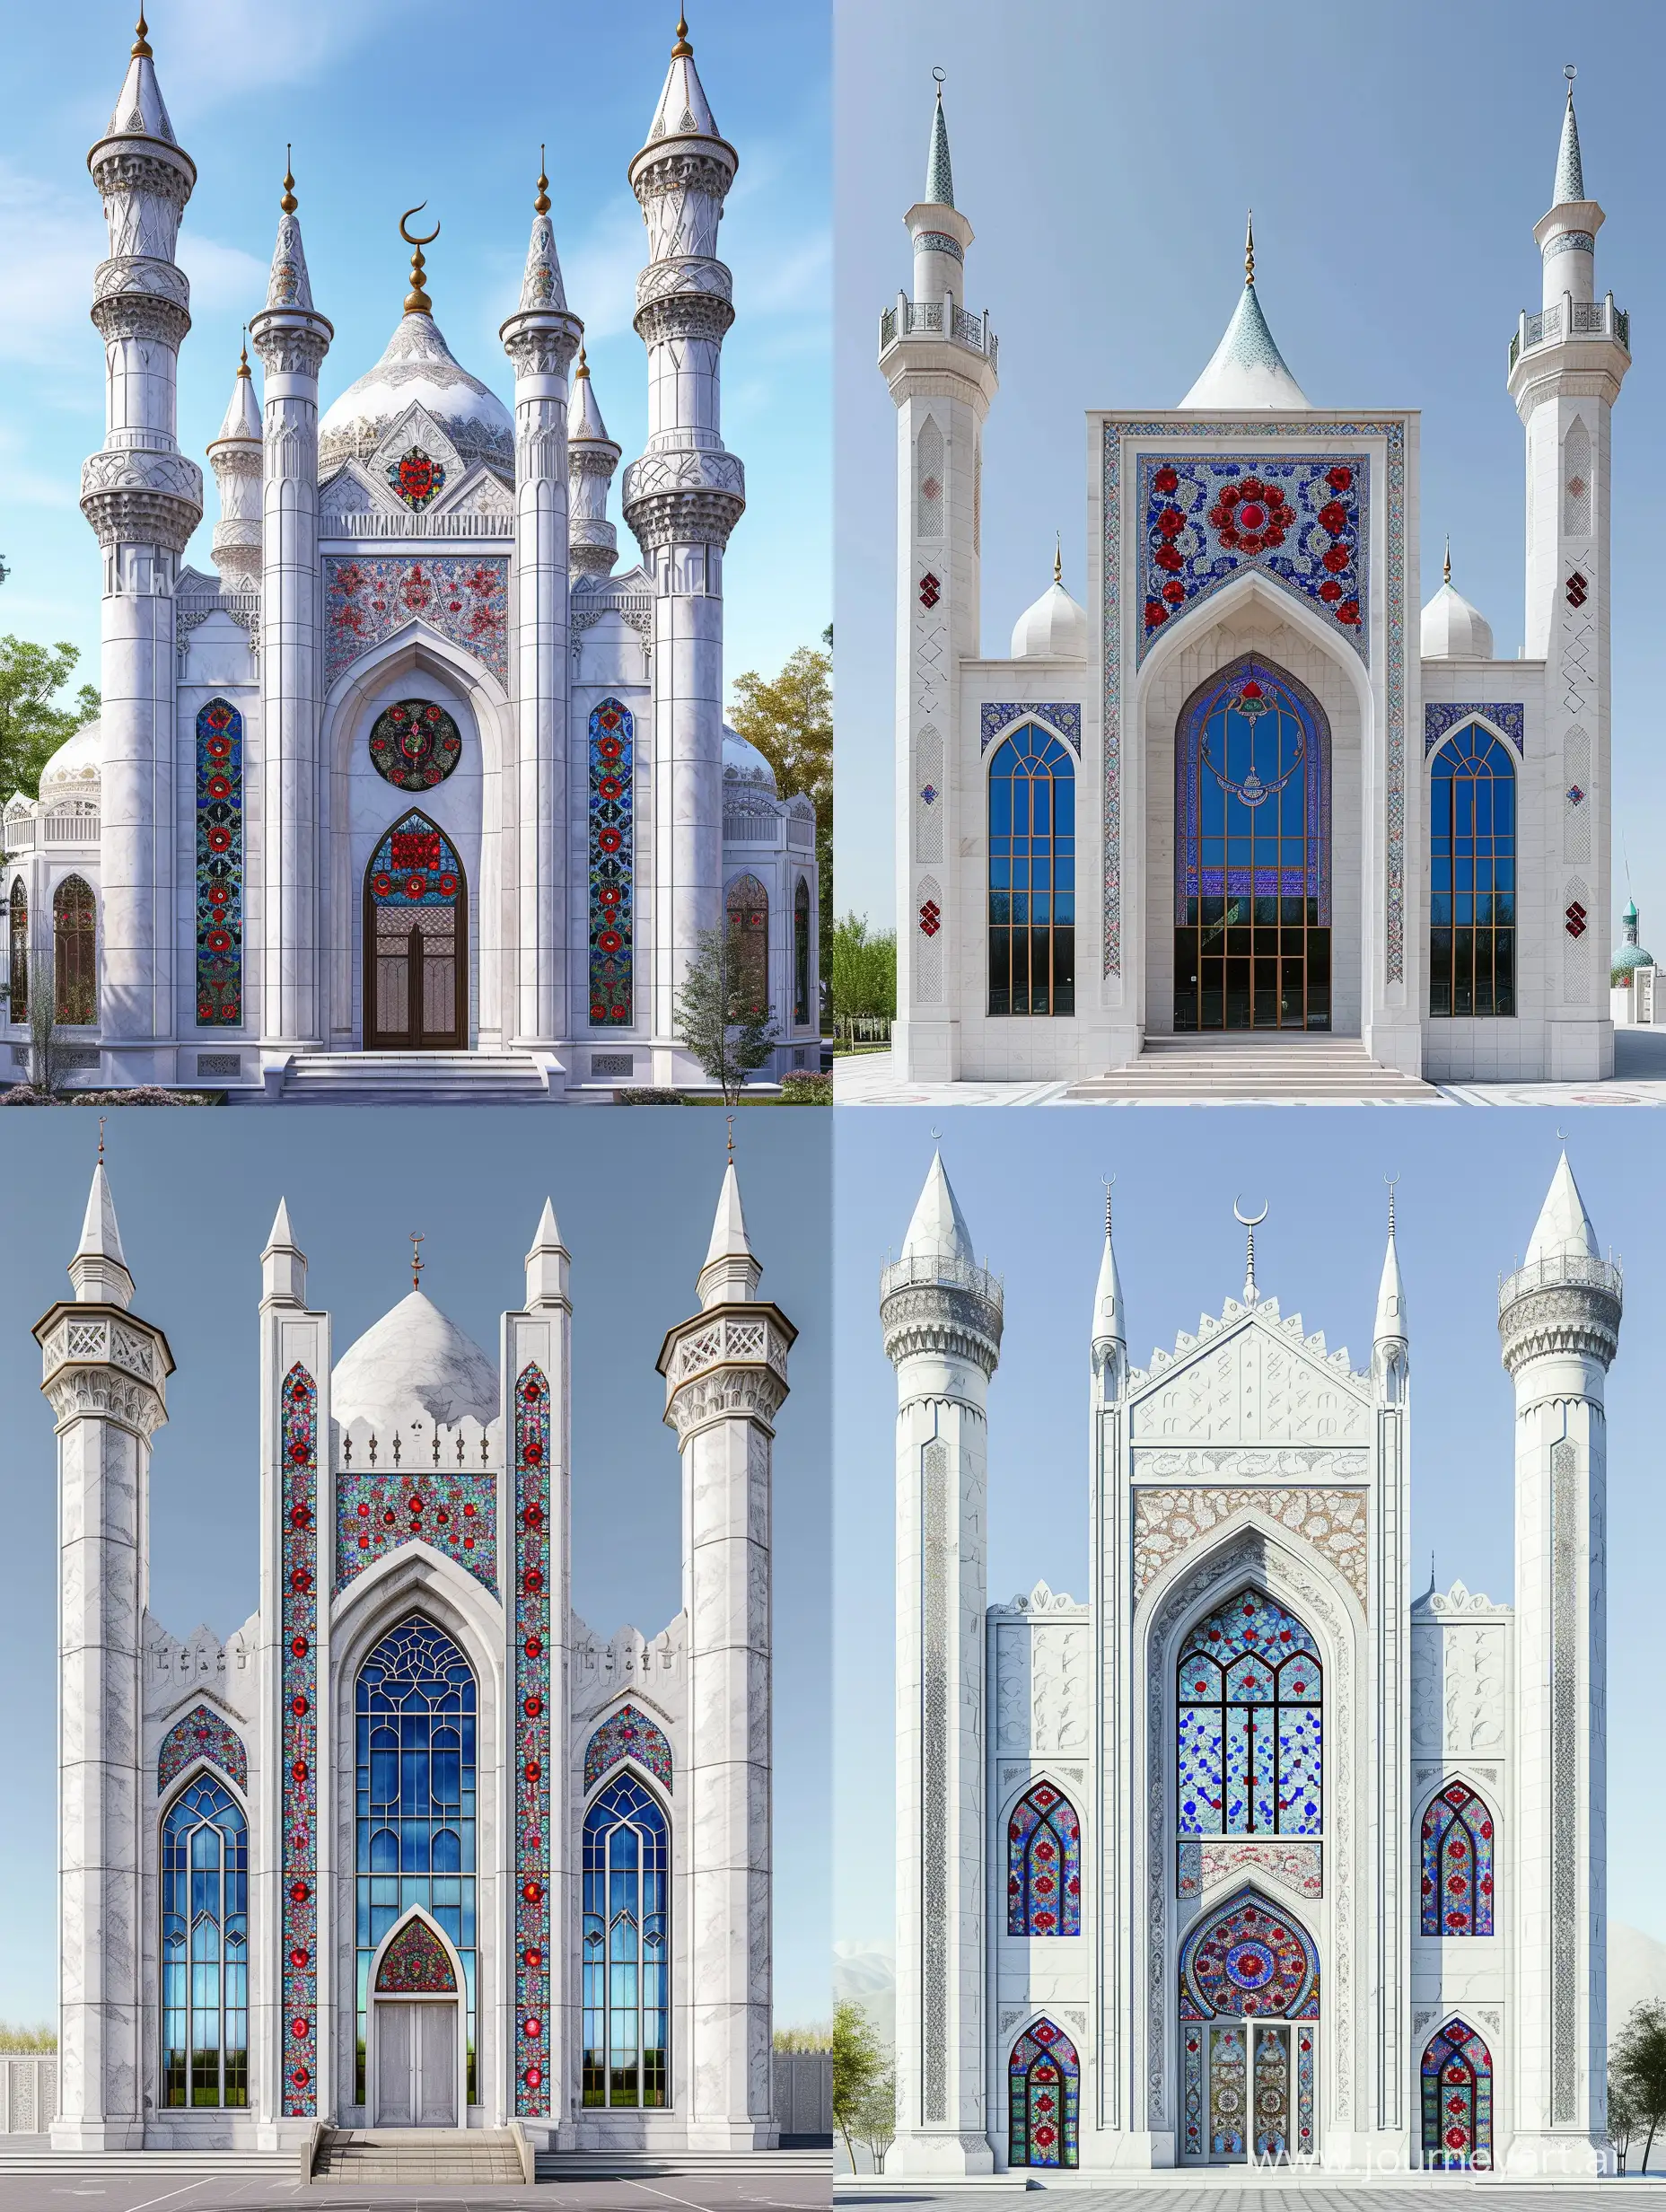 an Uzbekistan style mosque, White marbled exterior, tall iwan, stained glass windows, red blue persian floral motifs on spandrels, red blue gems and rubies embedded on arabesque ornaments, thin spires, full view, front view